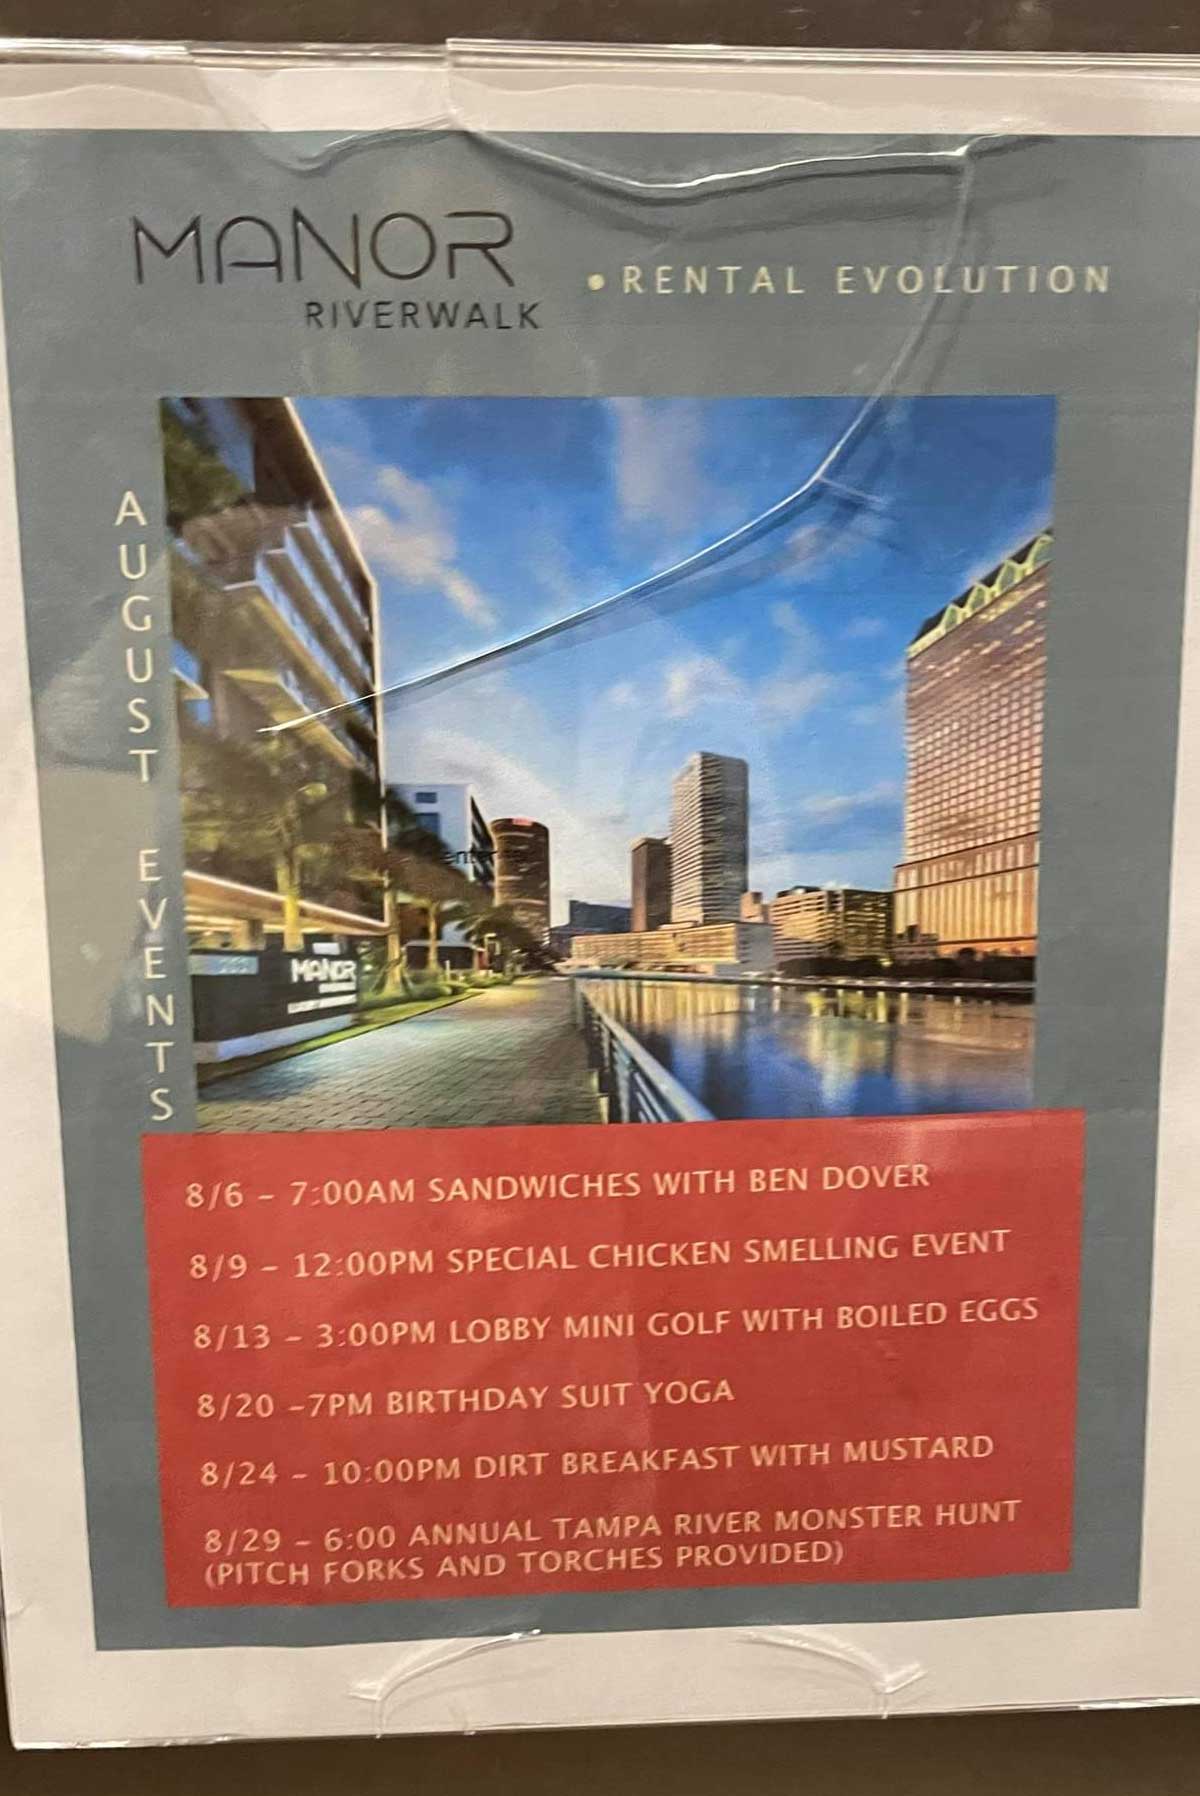 Someone replaced the event calendar in my apartment building and I have to say this is going to be an exciting month!